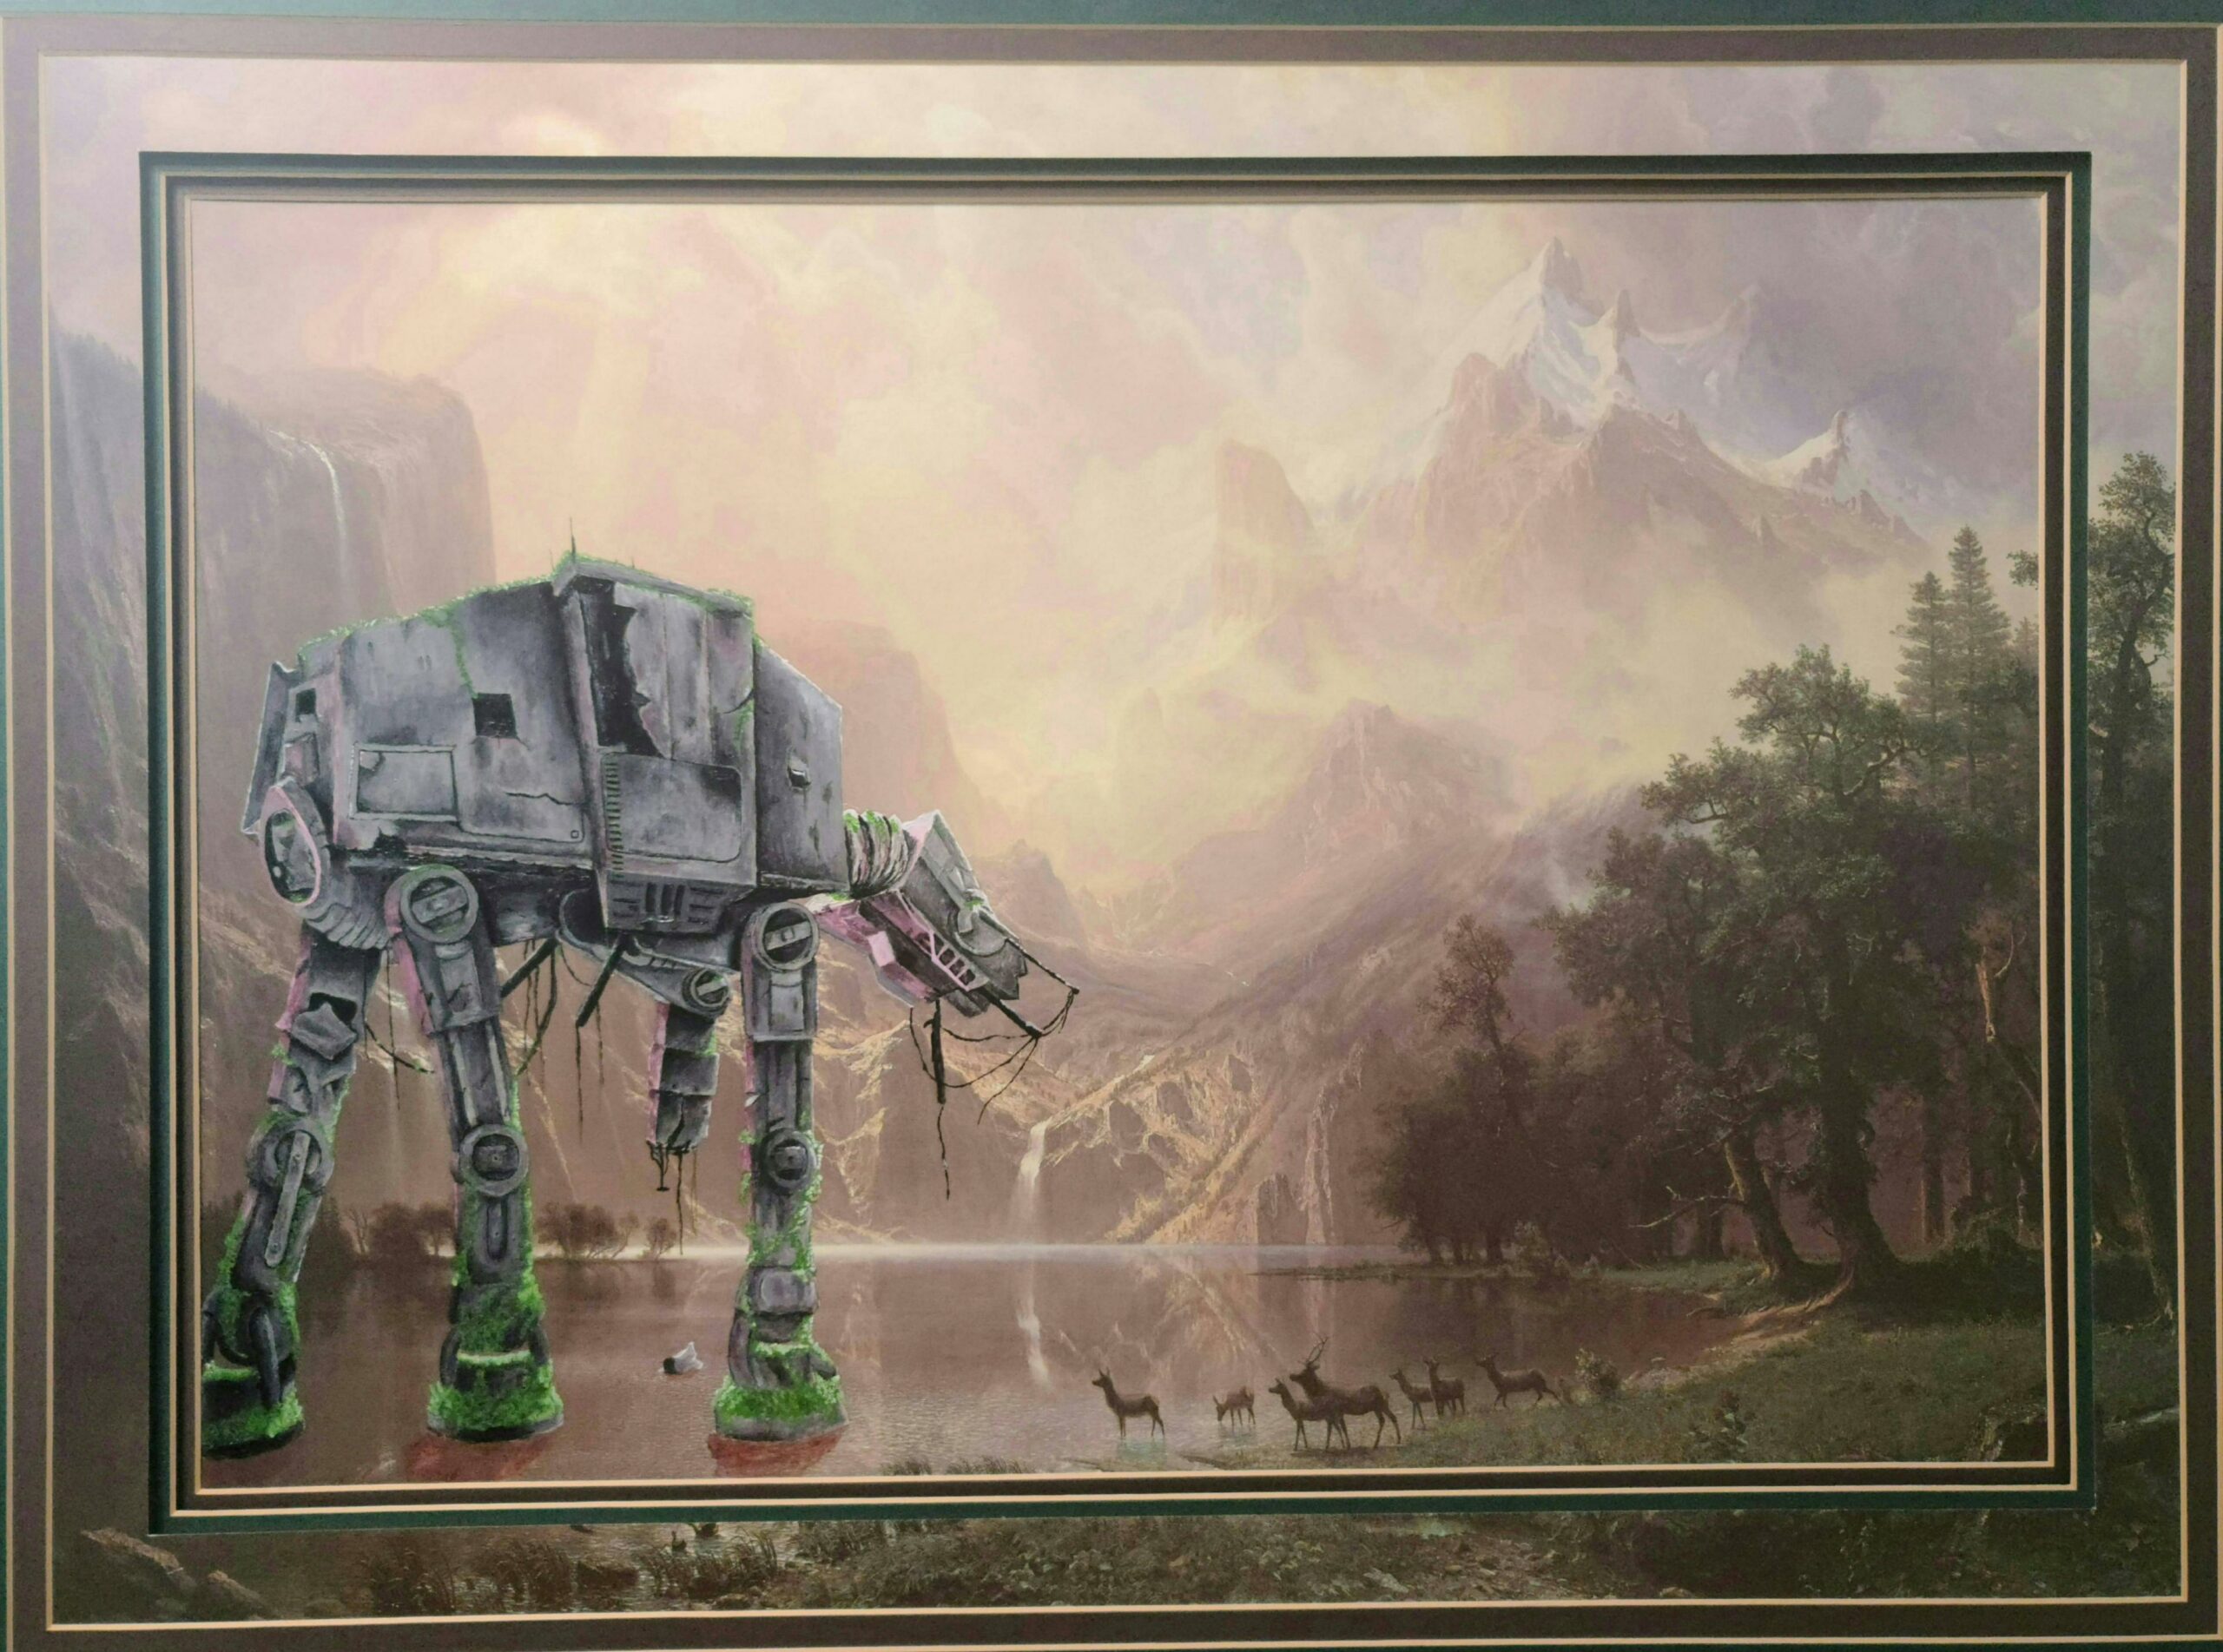 a landscape painting with trees, mountains, a lake, and deer. an at-at walker has been added and is standing in the water.